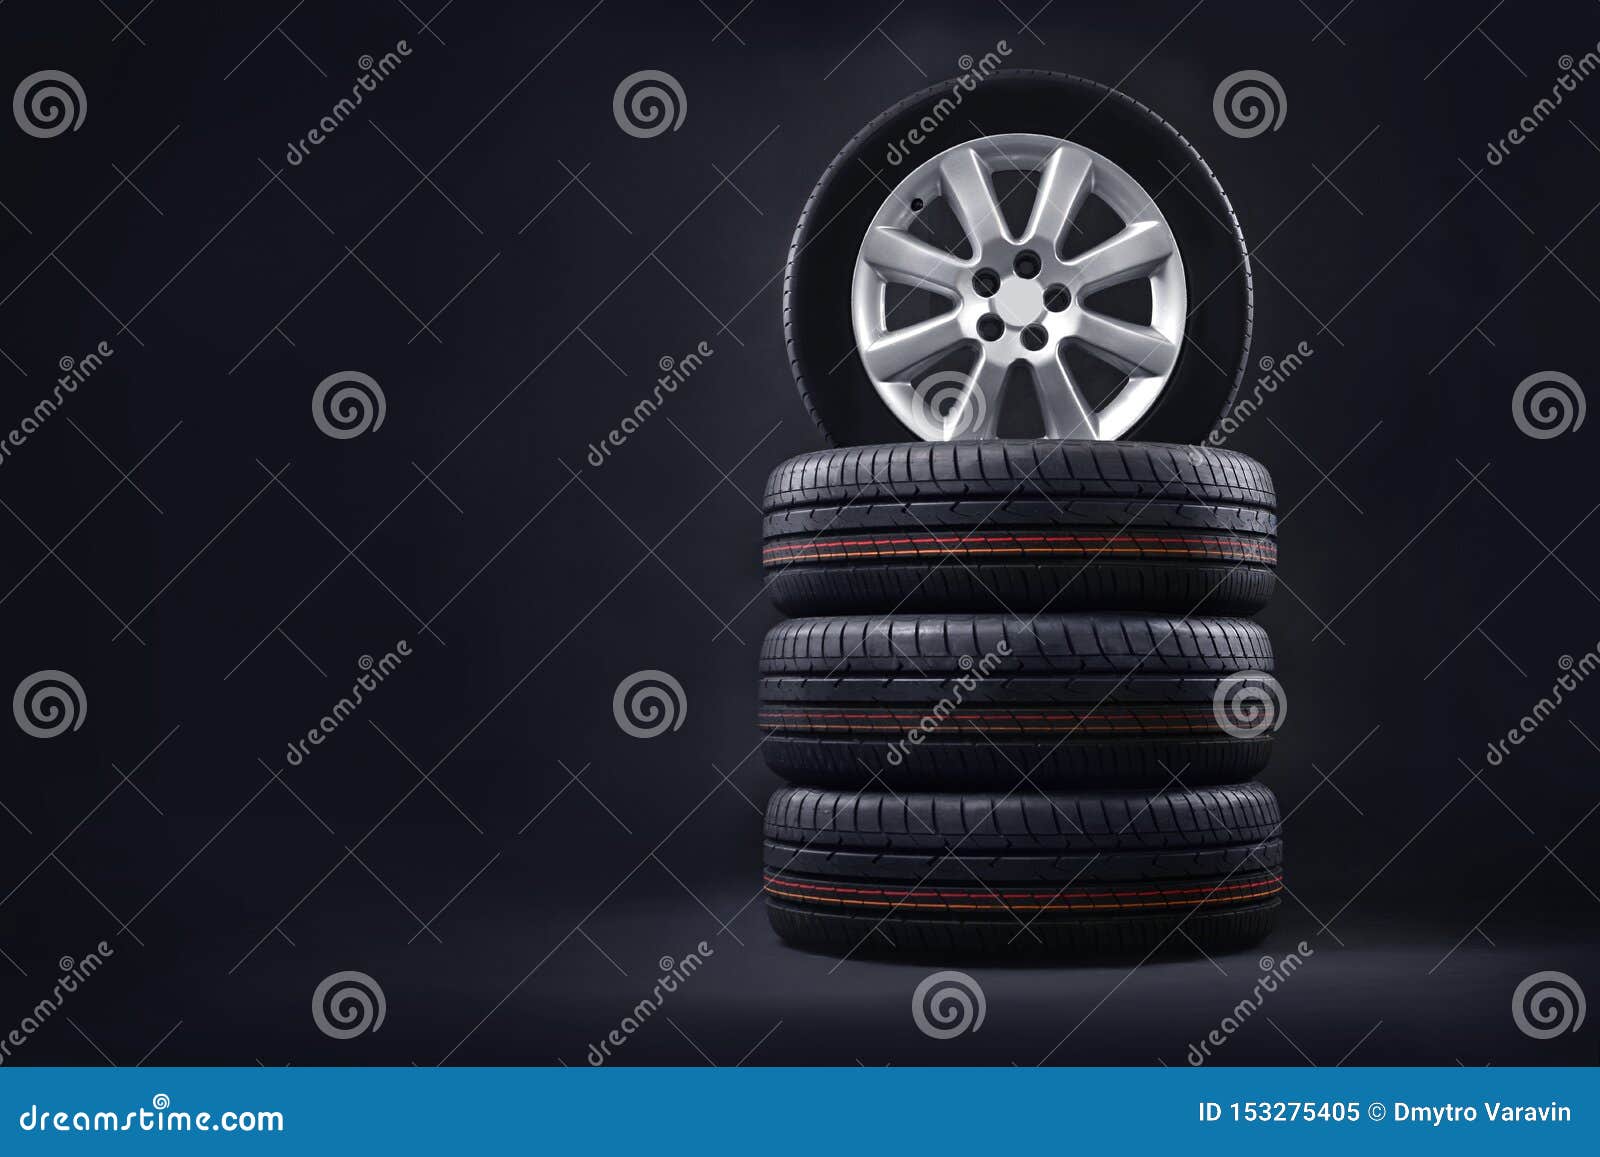 new tires pile on a dark background. tire fitting background.